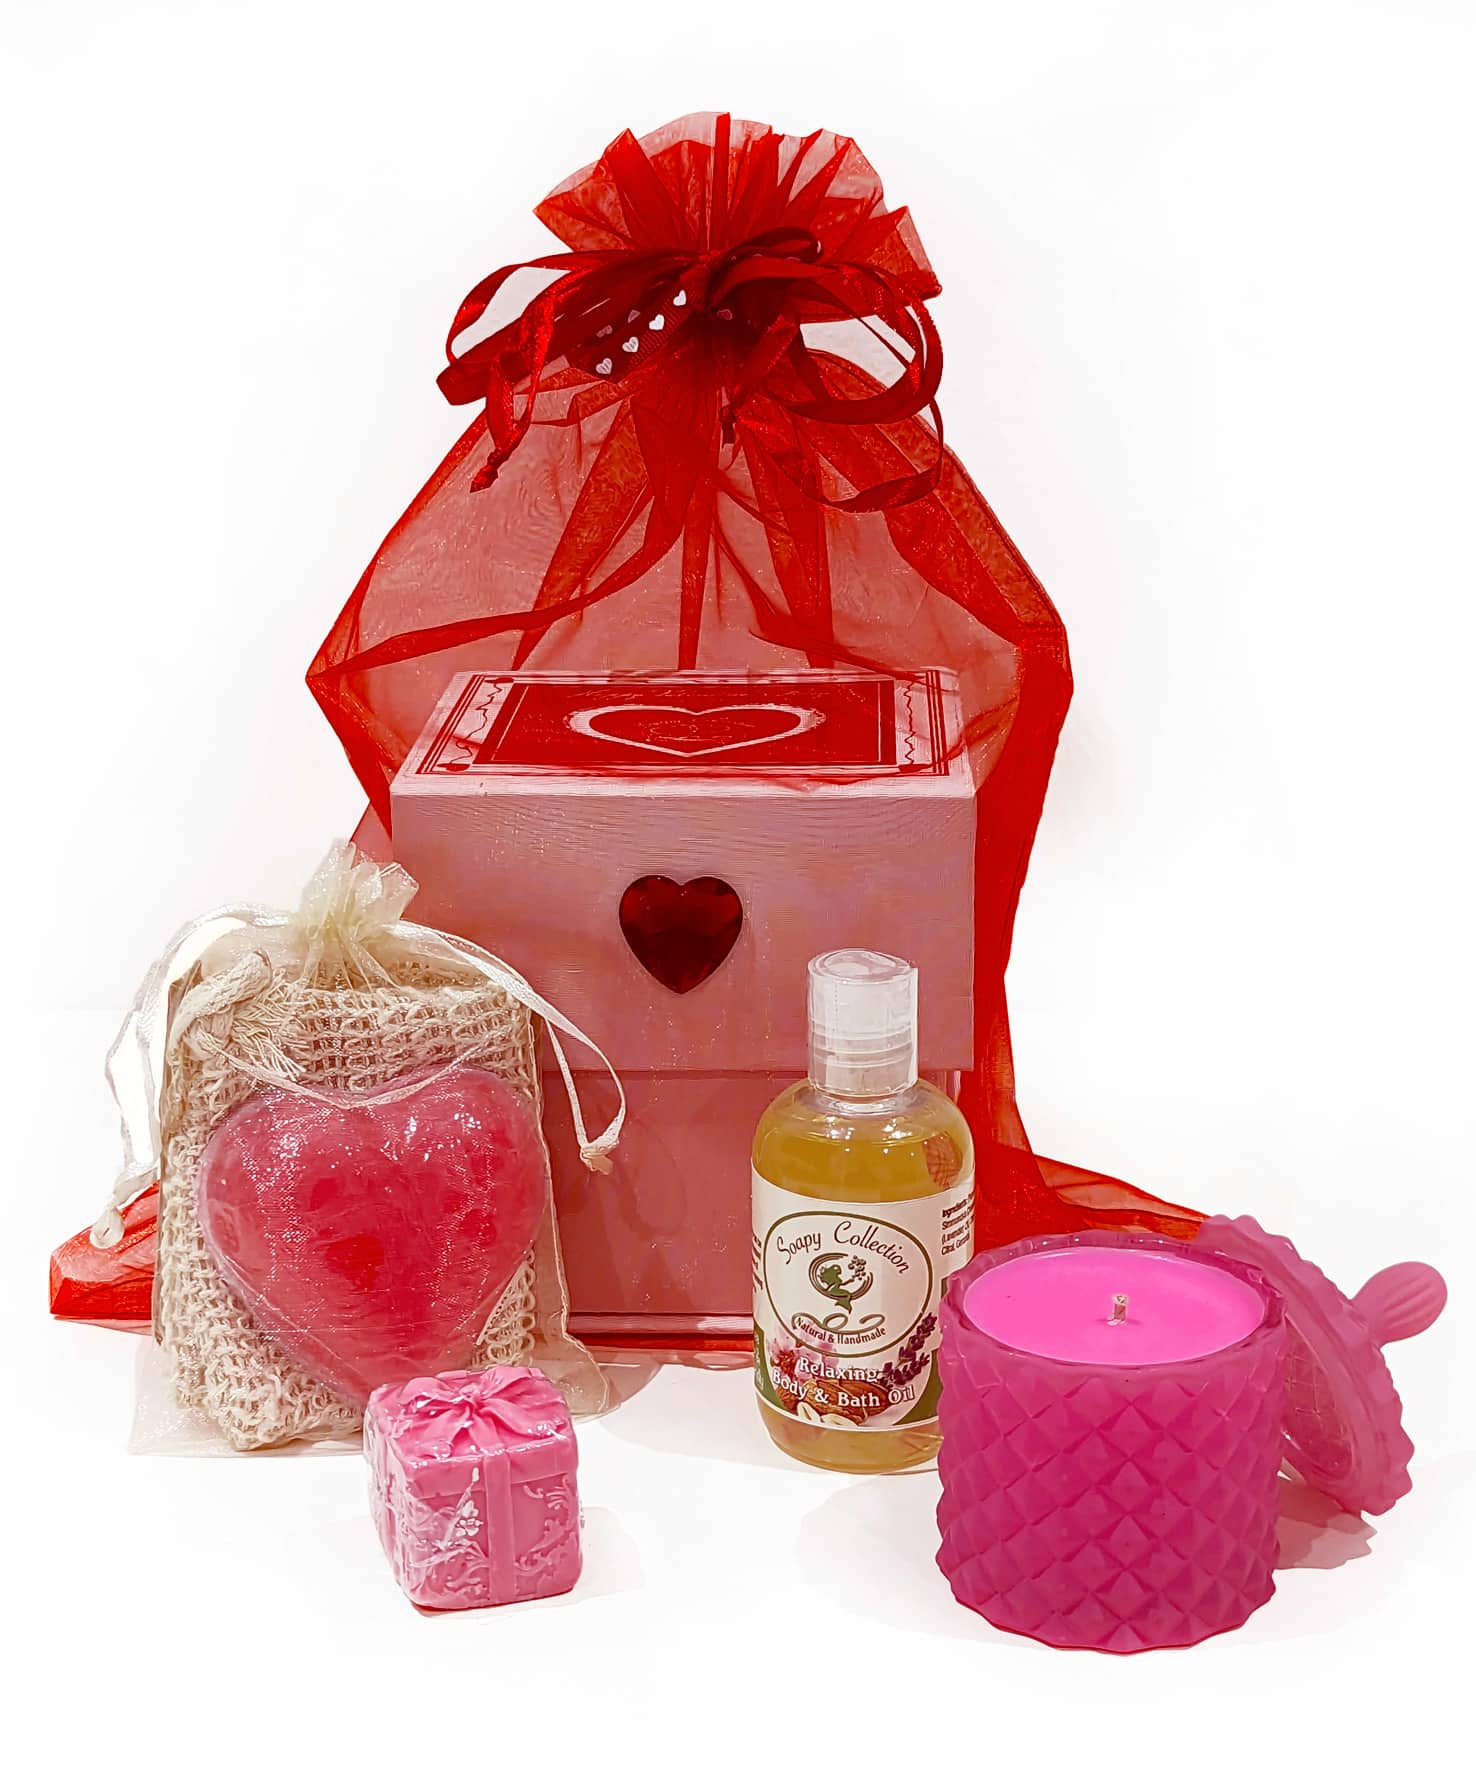 Valentines Gifts for Her - Soap Gift Box - Gifts for Women